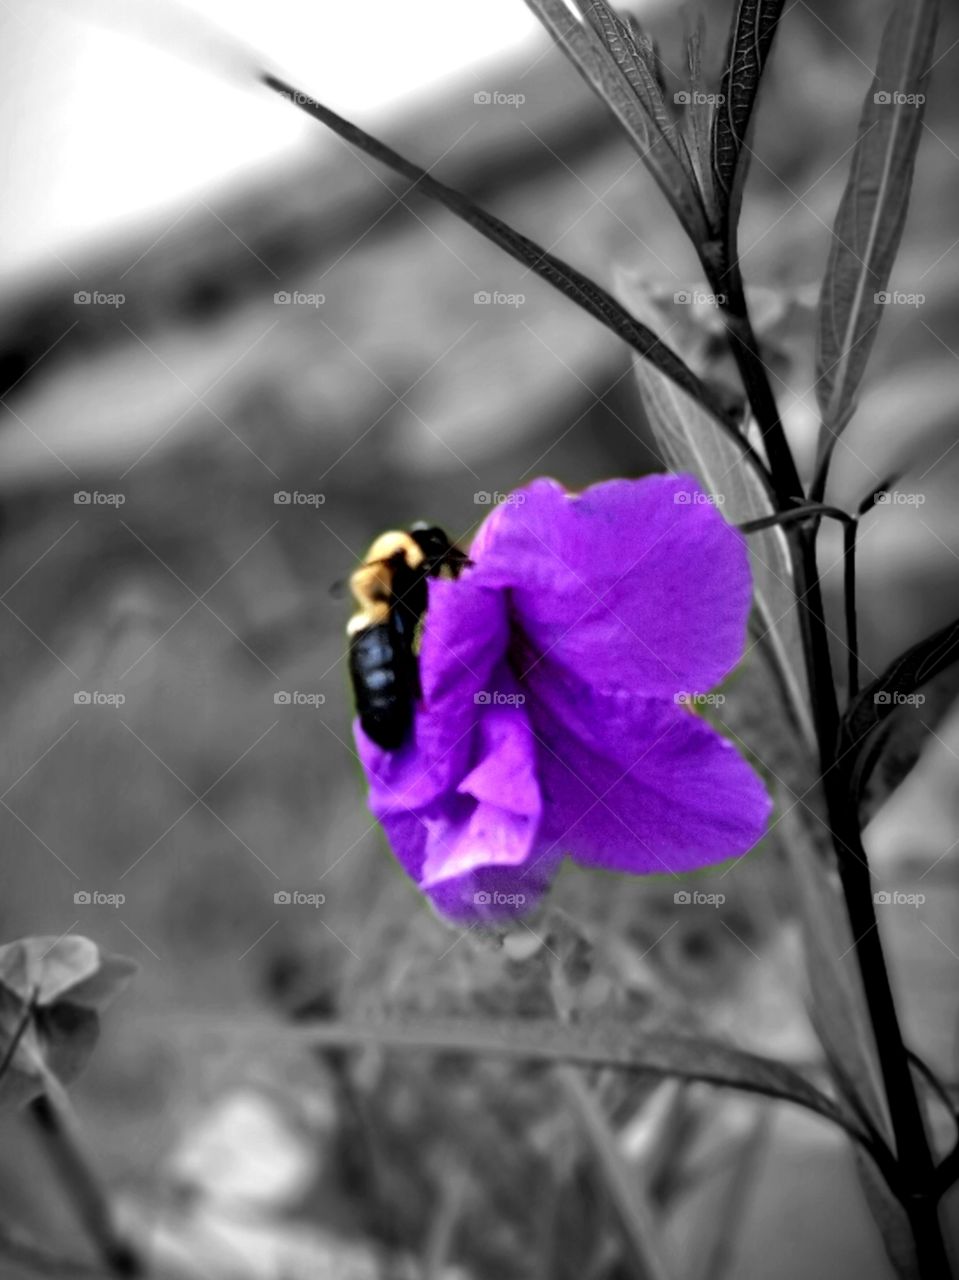 bumblebee looking for lunch on purple flower